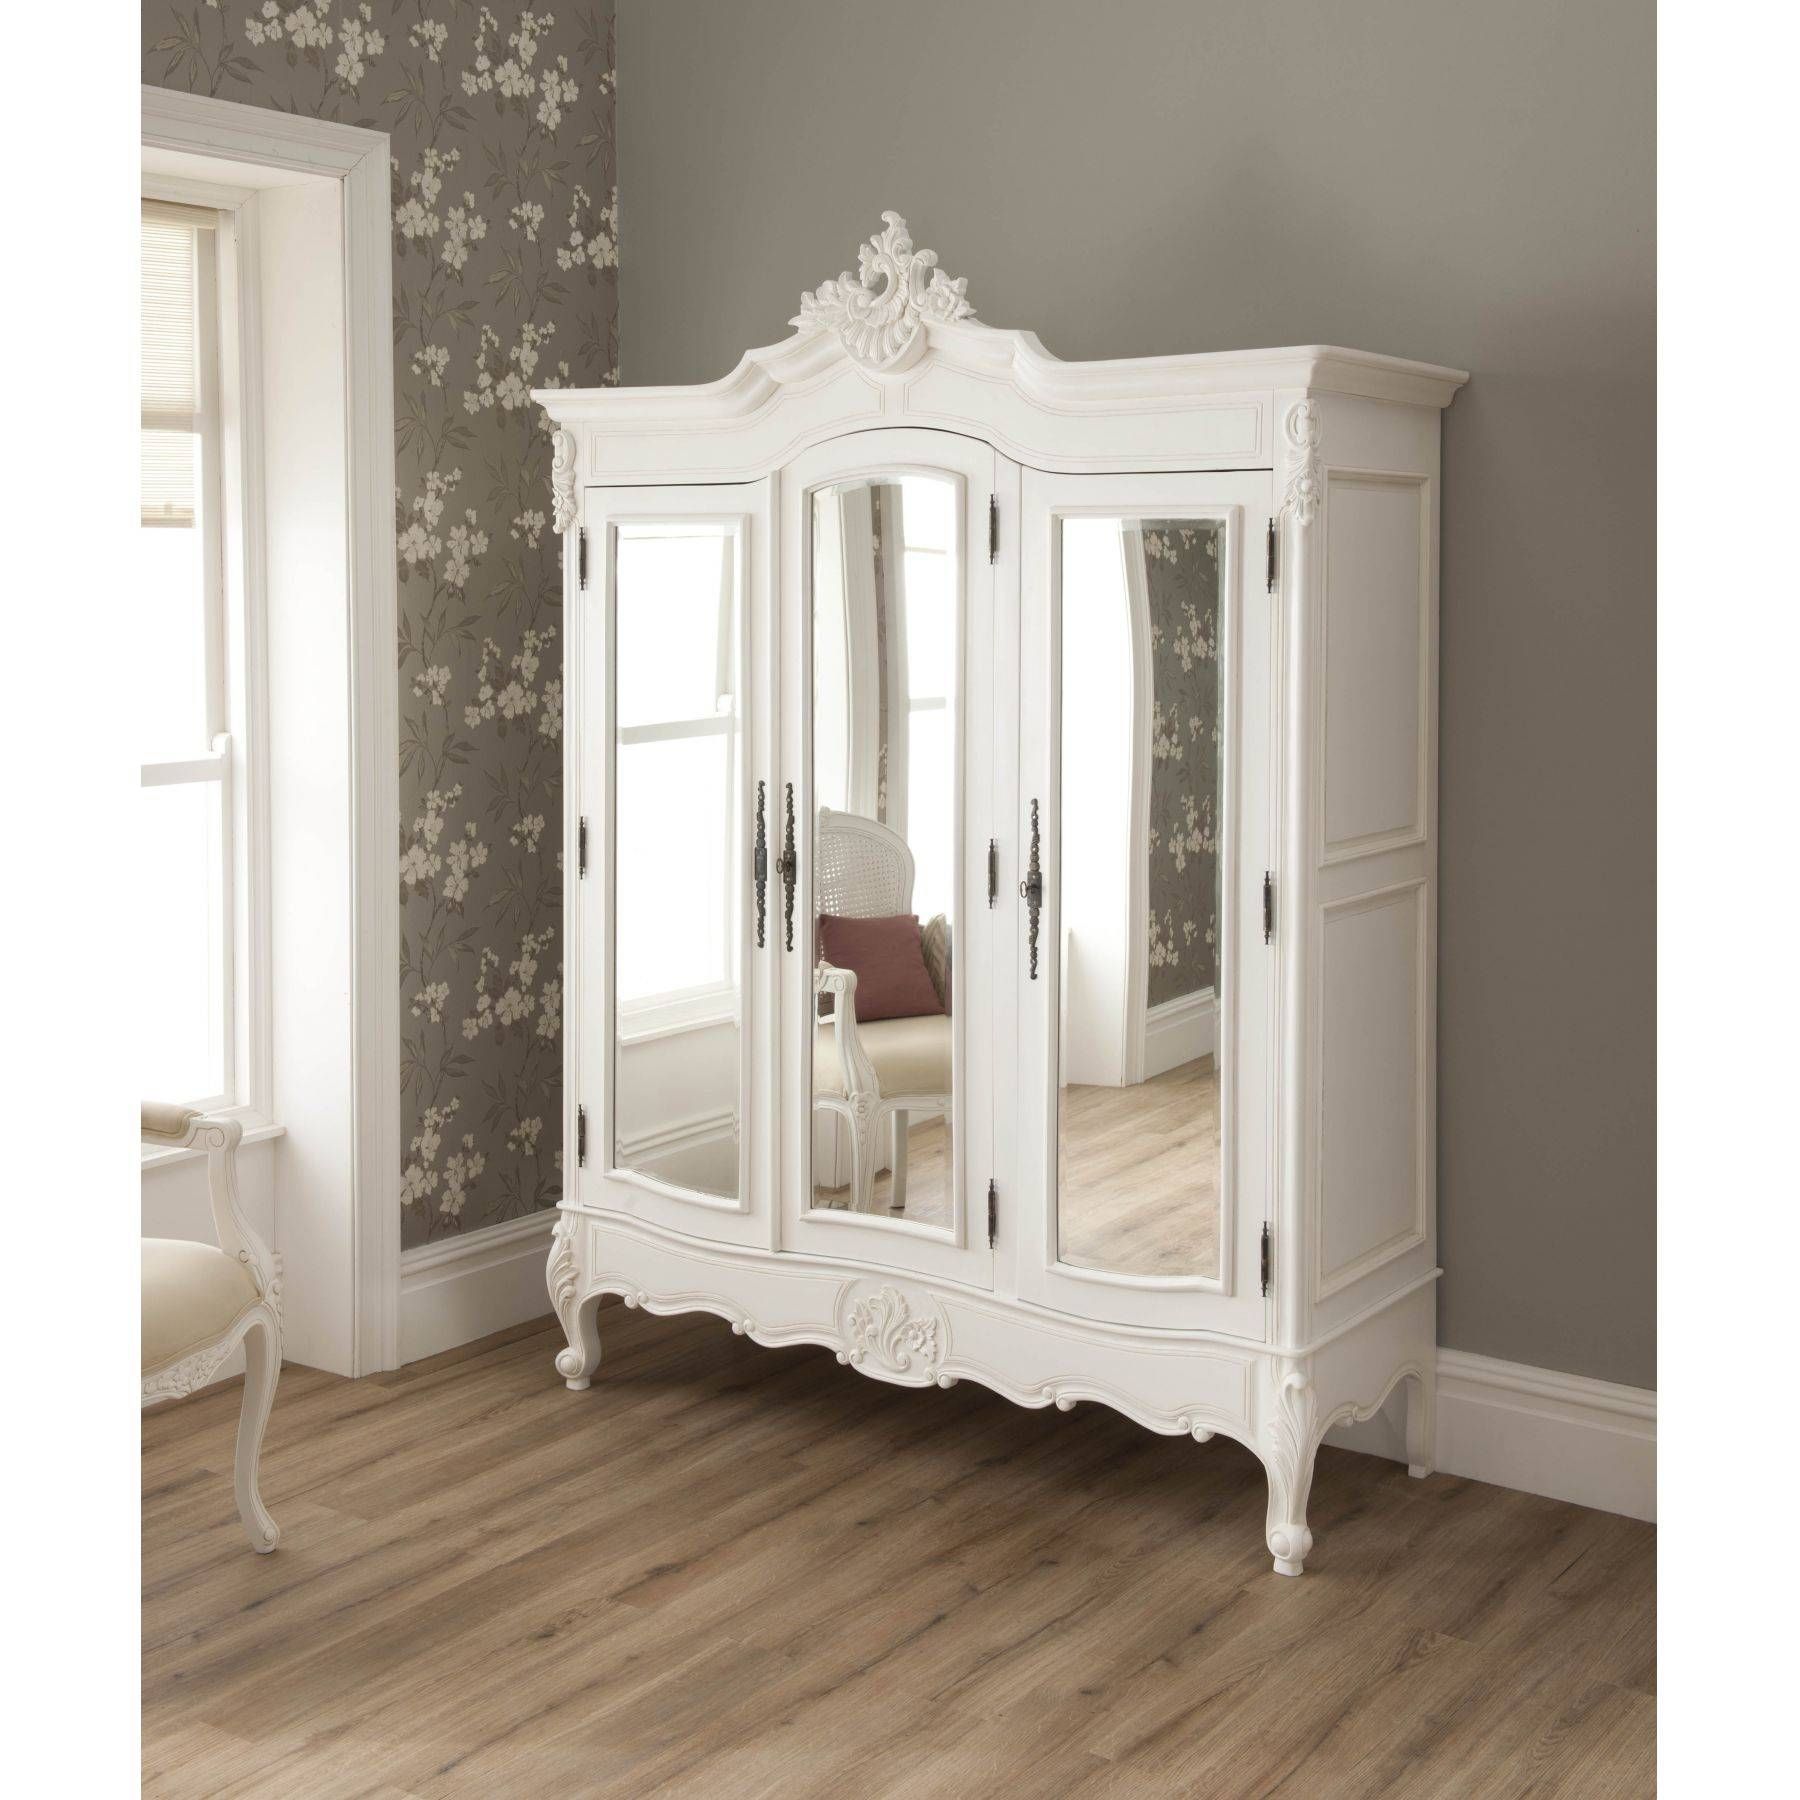 La Rochelle Shabby Chic Antique Style Wardrobe | Shabby Chic Furniture Intended For White French Armoire Wardrobes (View 6 of 15)